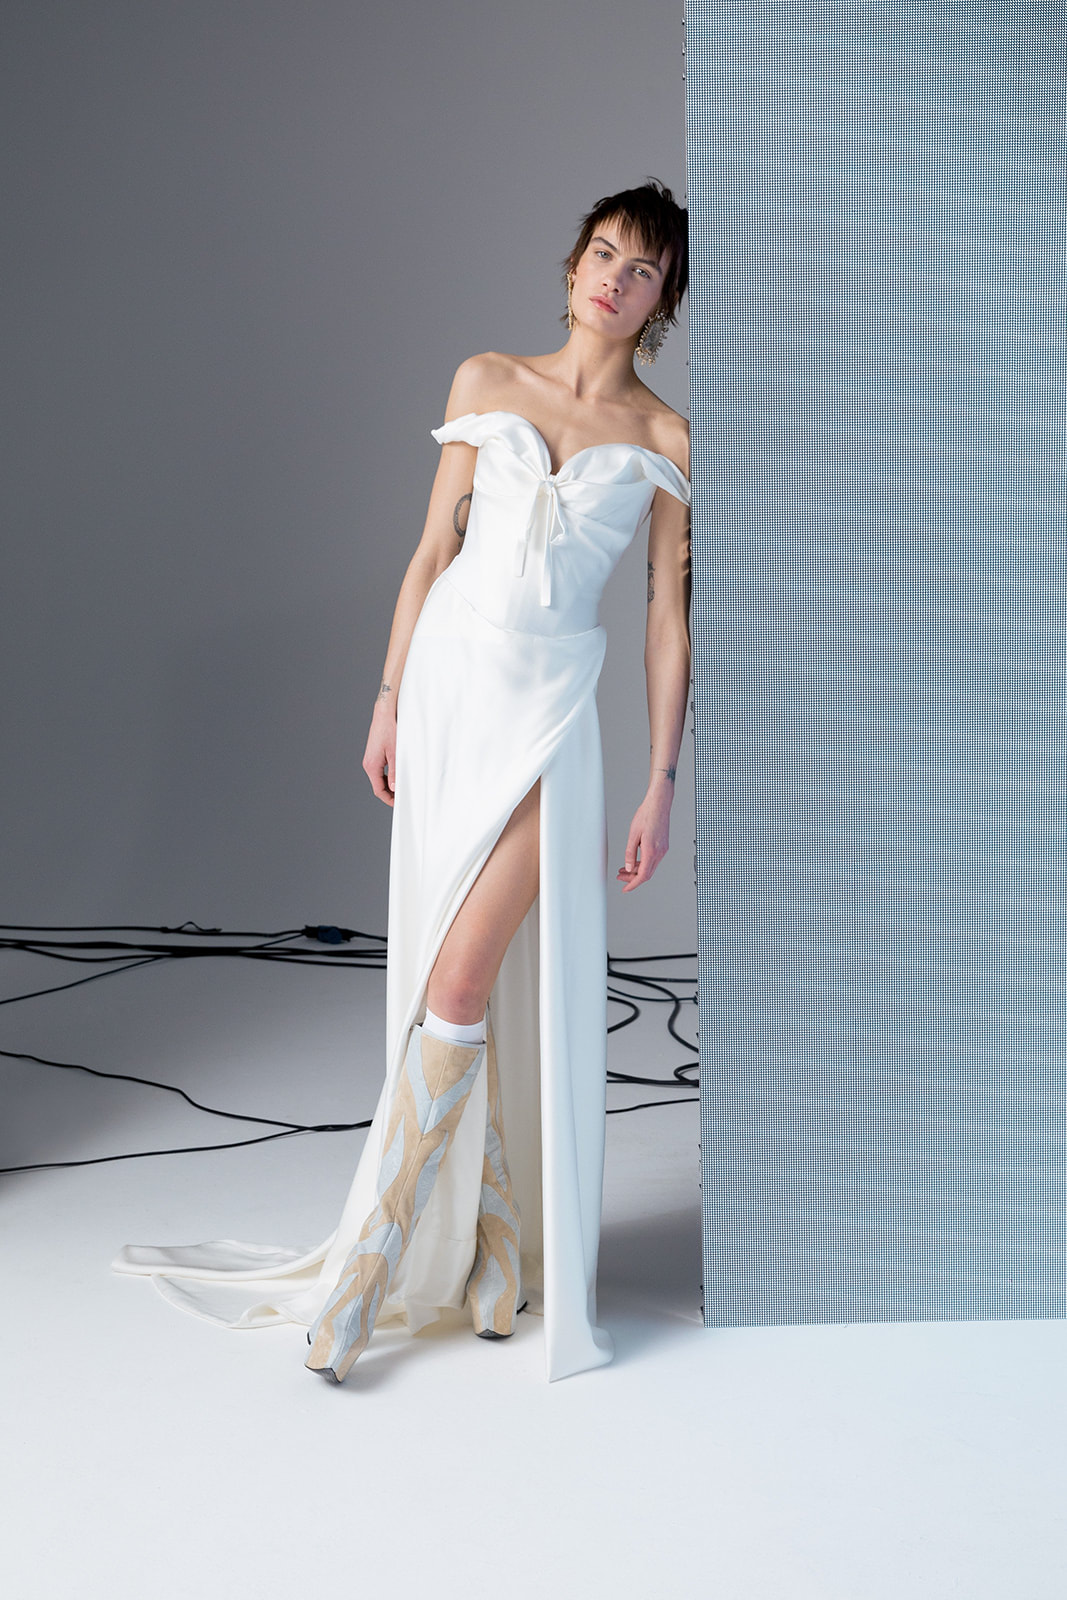 Vivienne Westwood Bridal: With bold cuts, unique draping, and unexpected details.